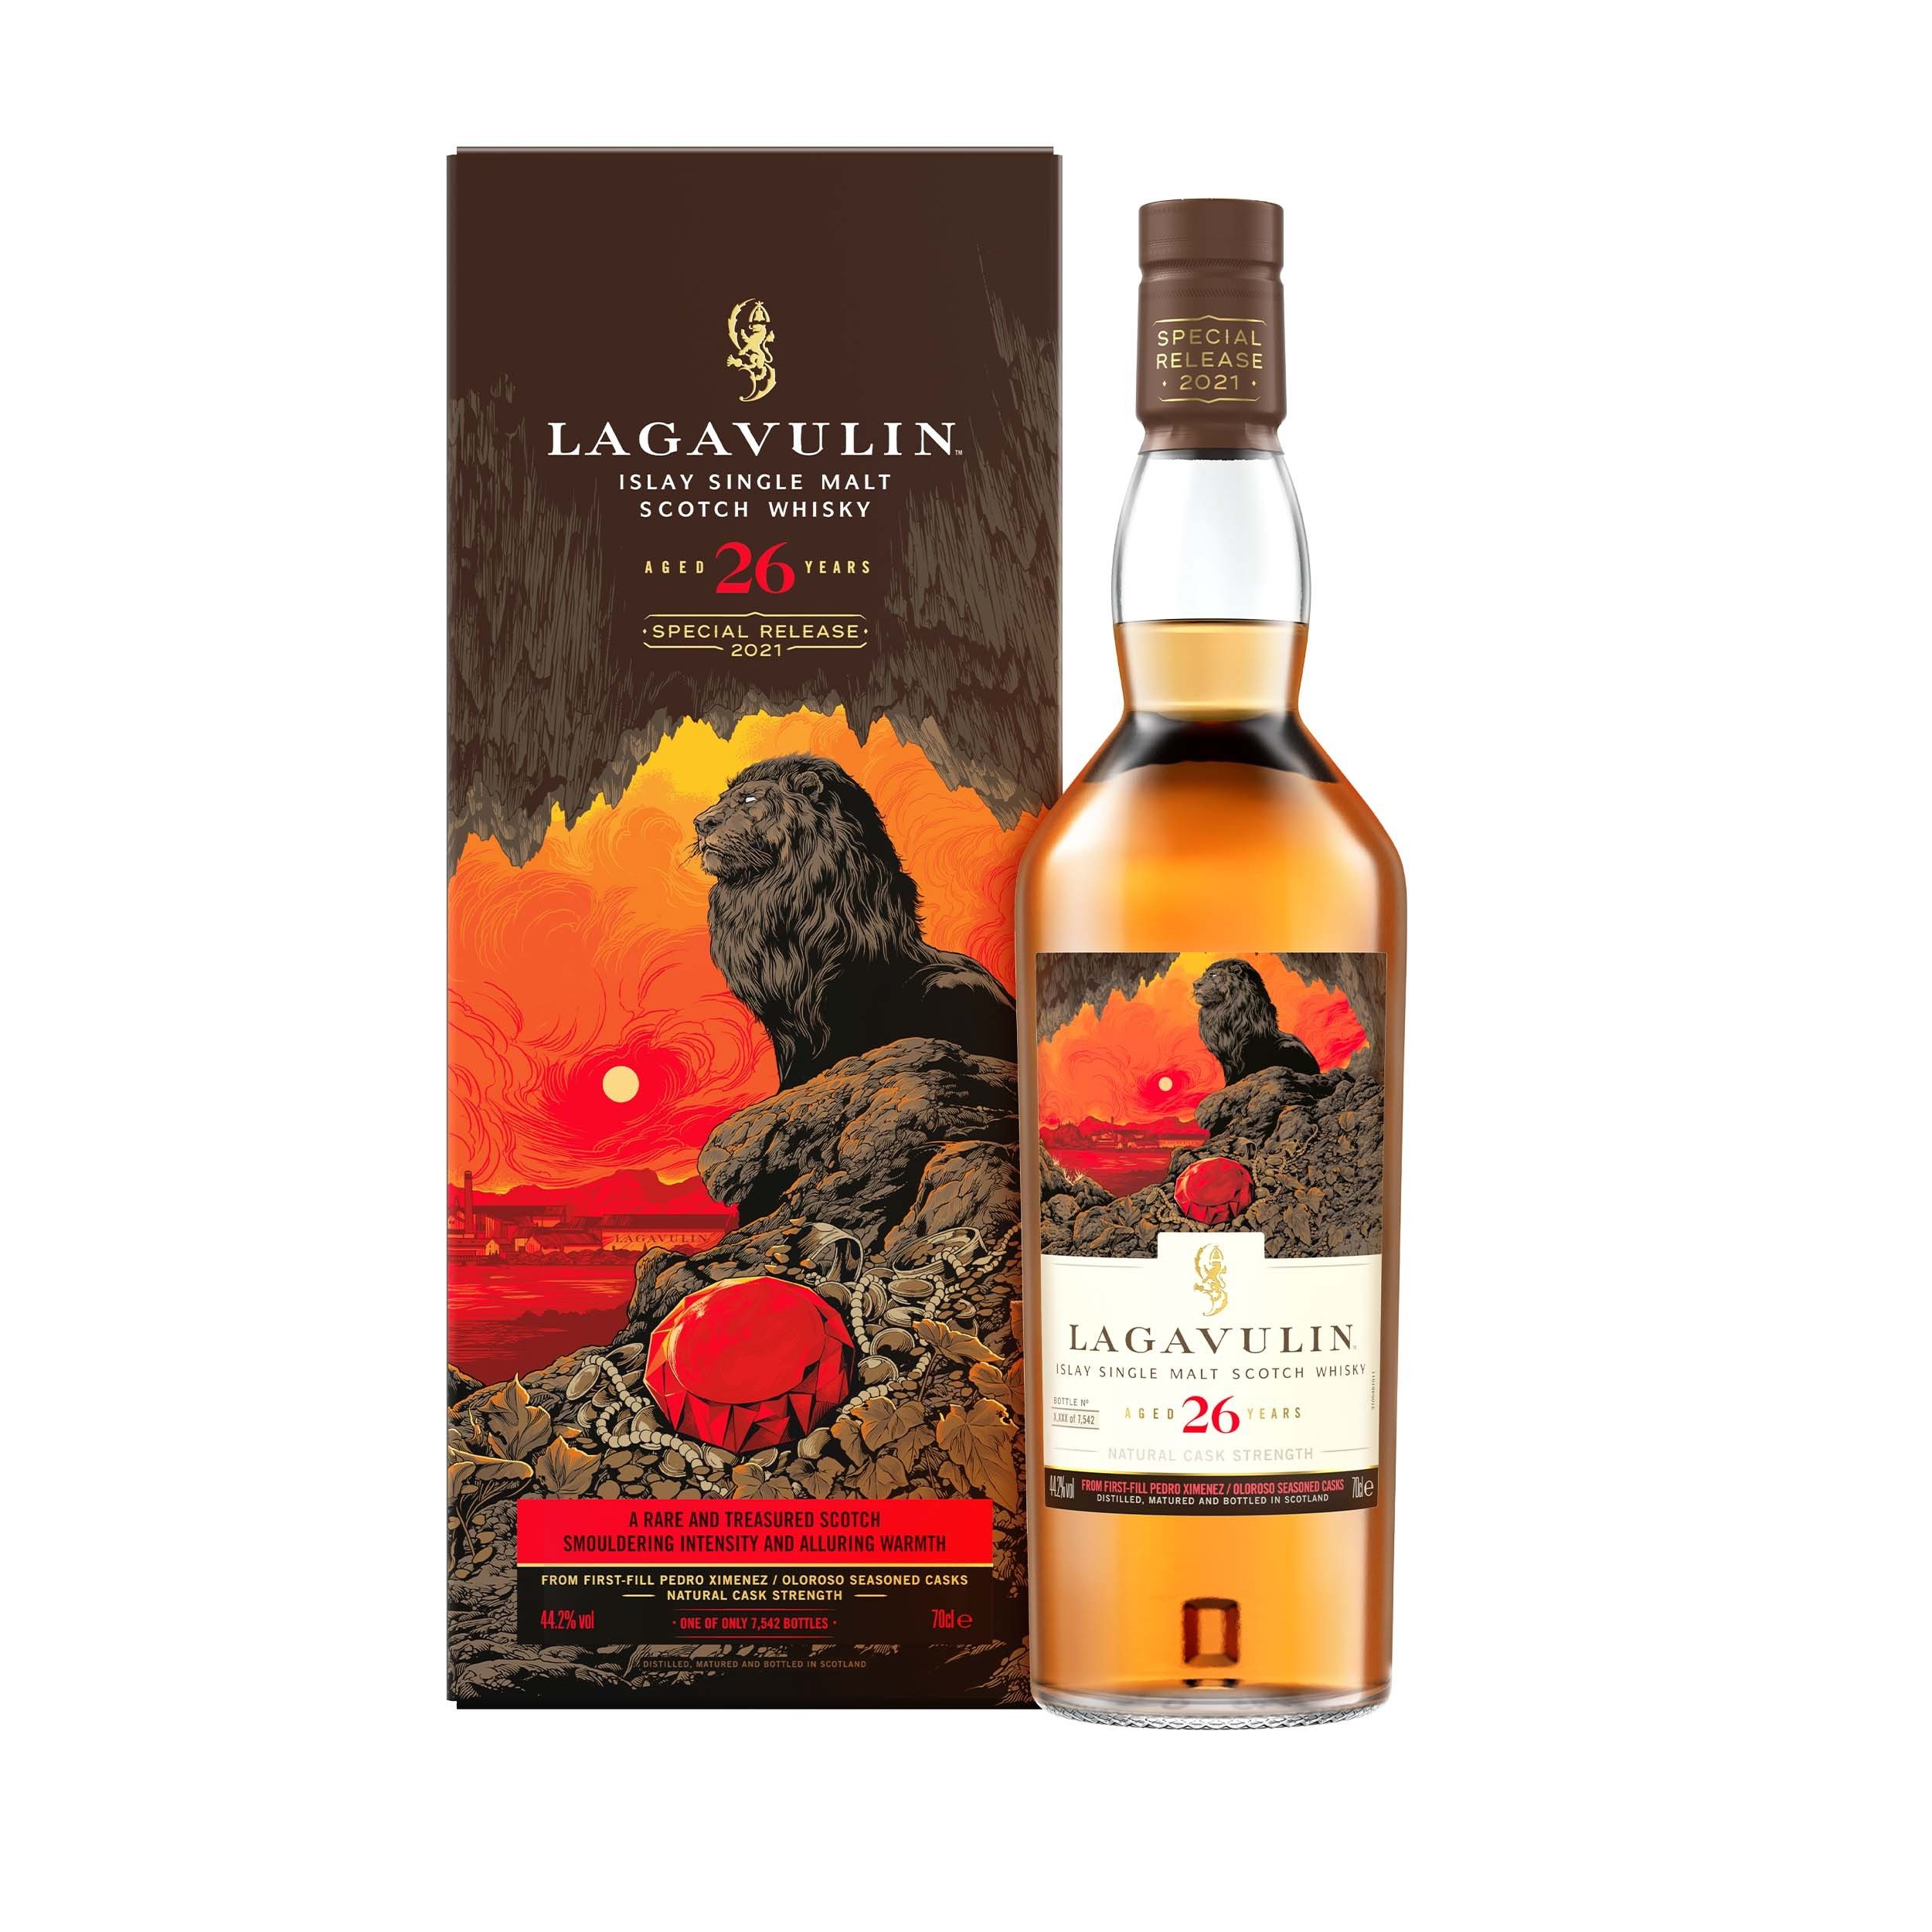 Lagavulin 26 Year Old Special Releases 2021 Single Malt Scotch Whisky